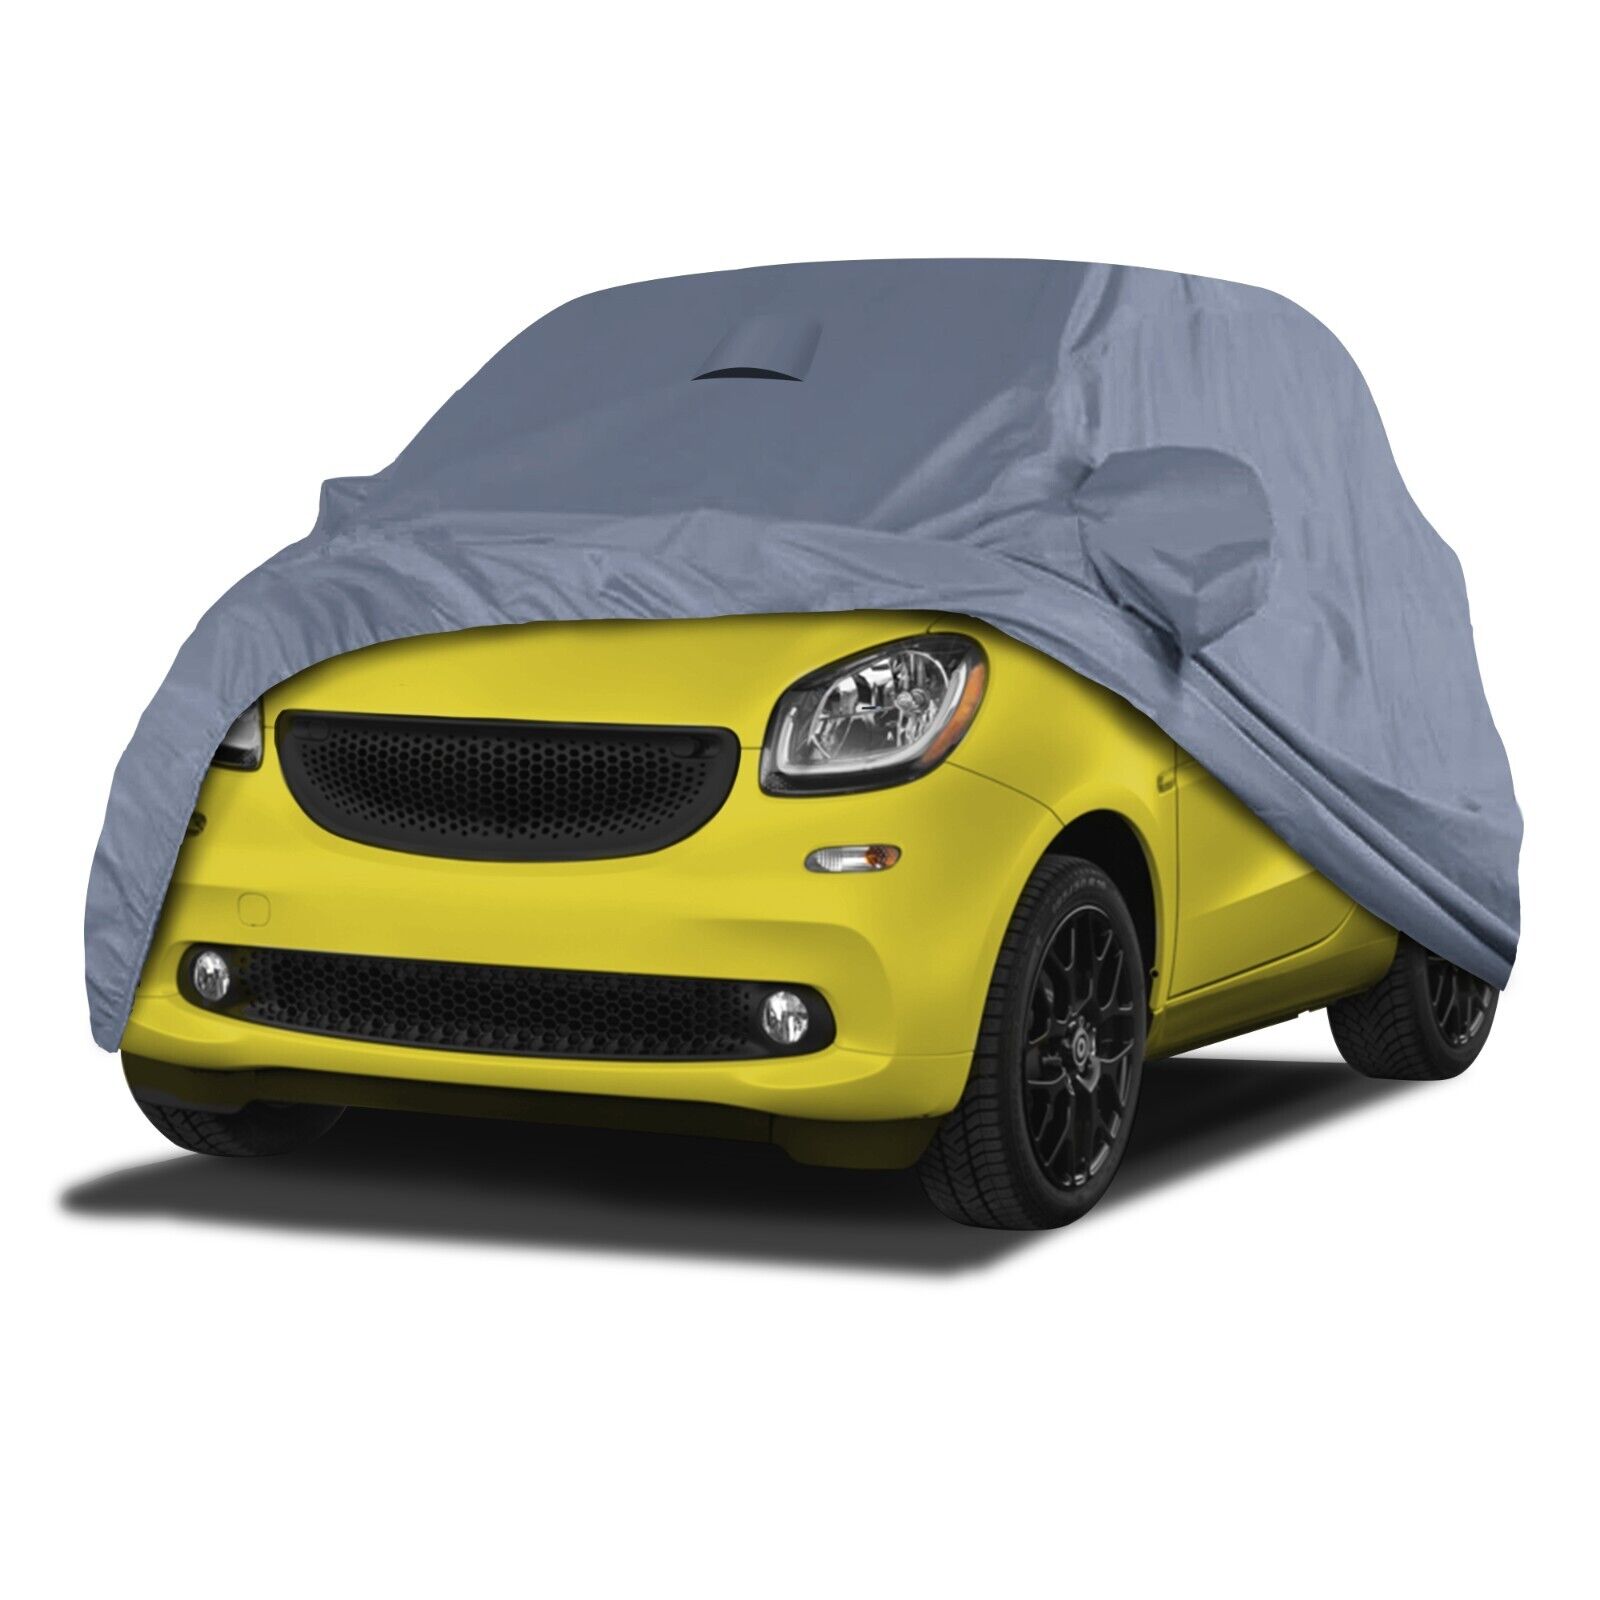 DaShield Waterproof Custom Fit Car Cover for 2007-2016 Smart Marque K Fortwo